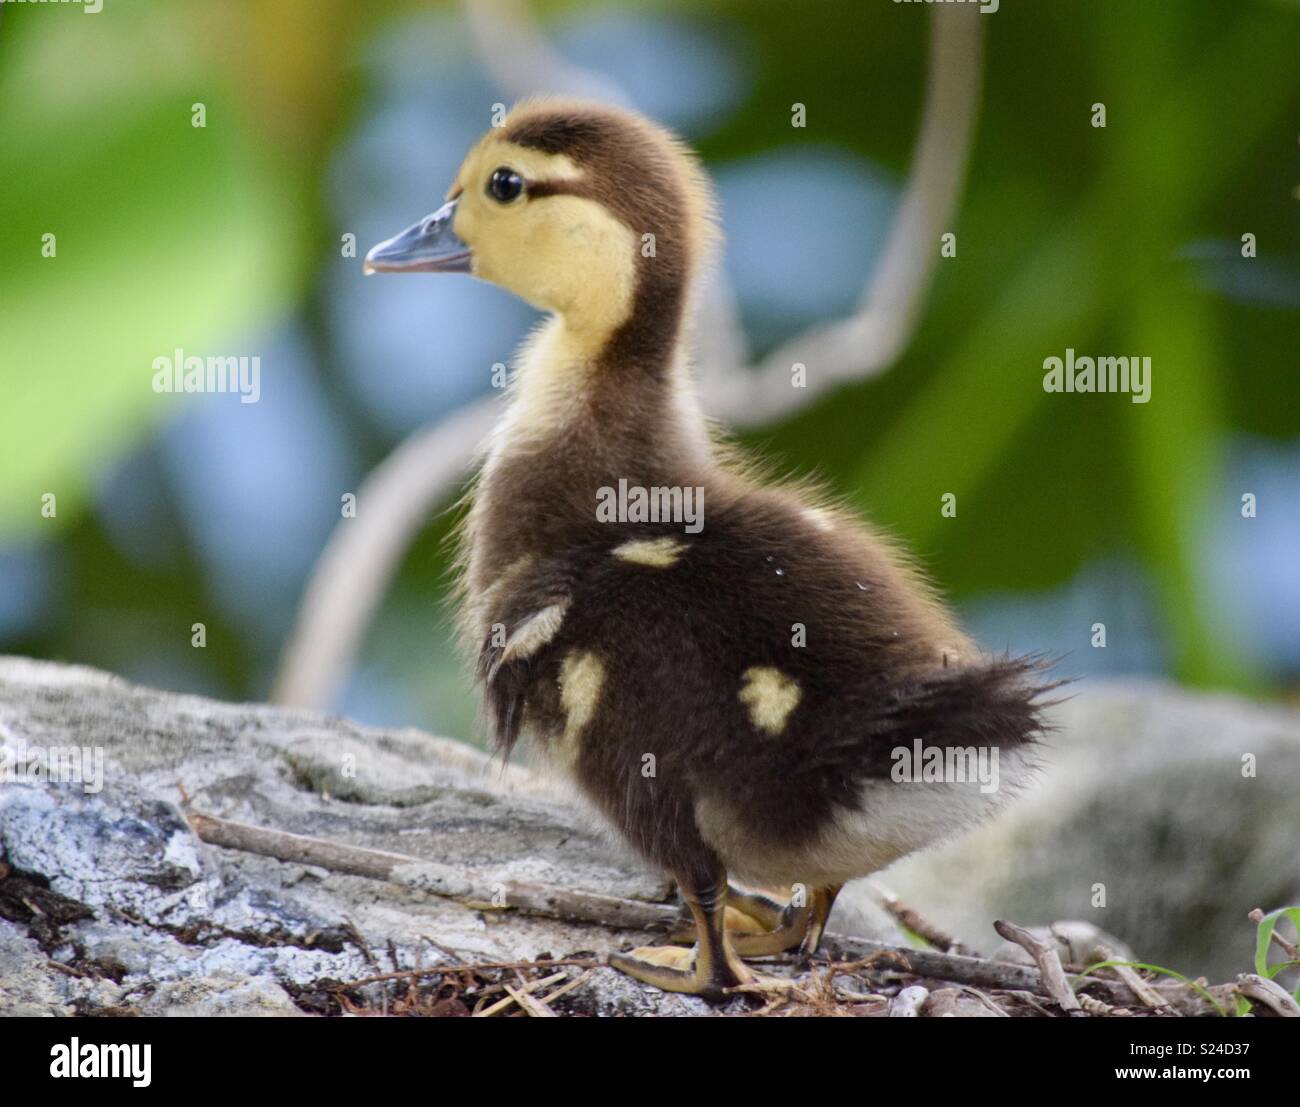 Baby Muscovy duck Stock Photo